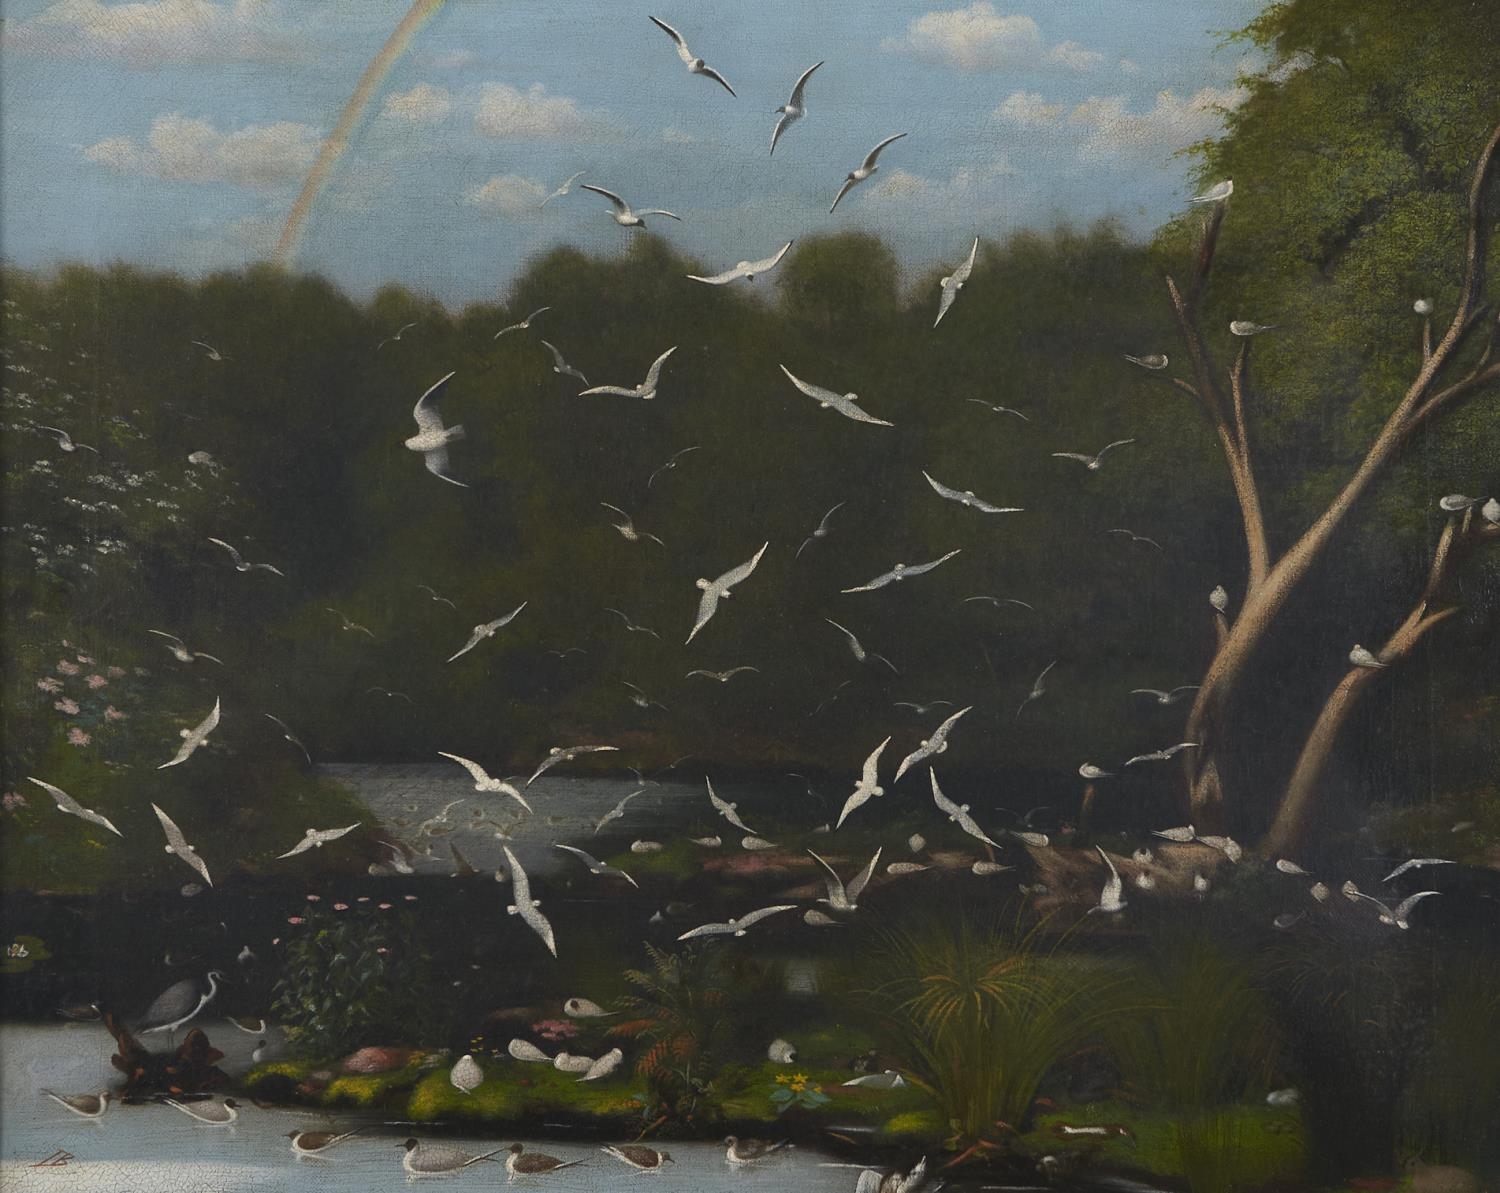 English Naive Artist, 19th / early 20th century - Birds Returning to Roost over a Mill Pond at